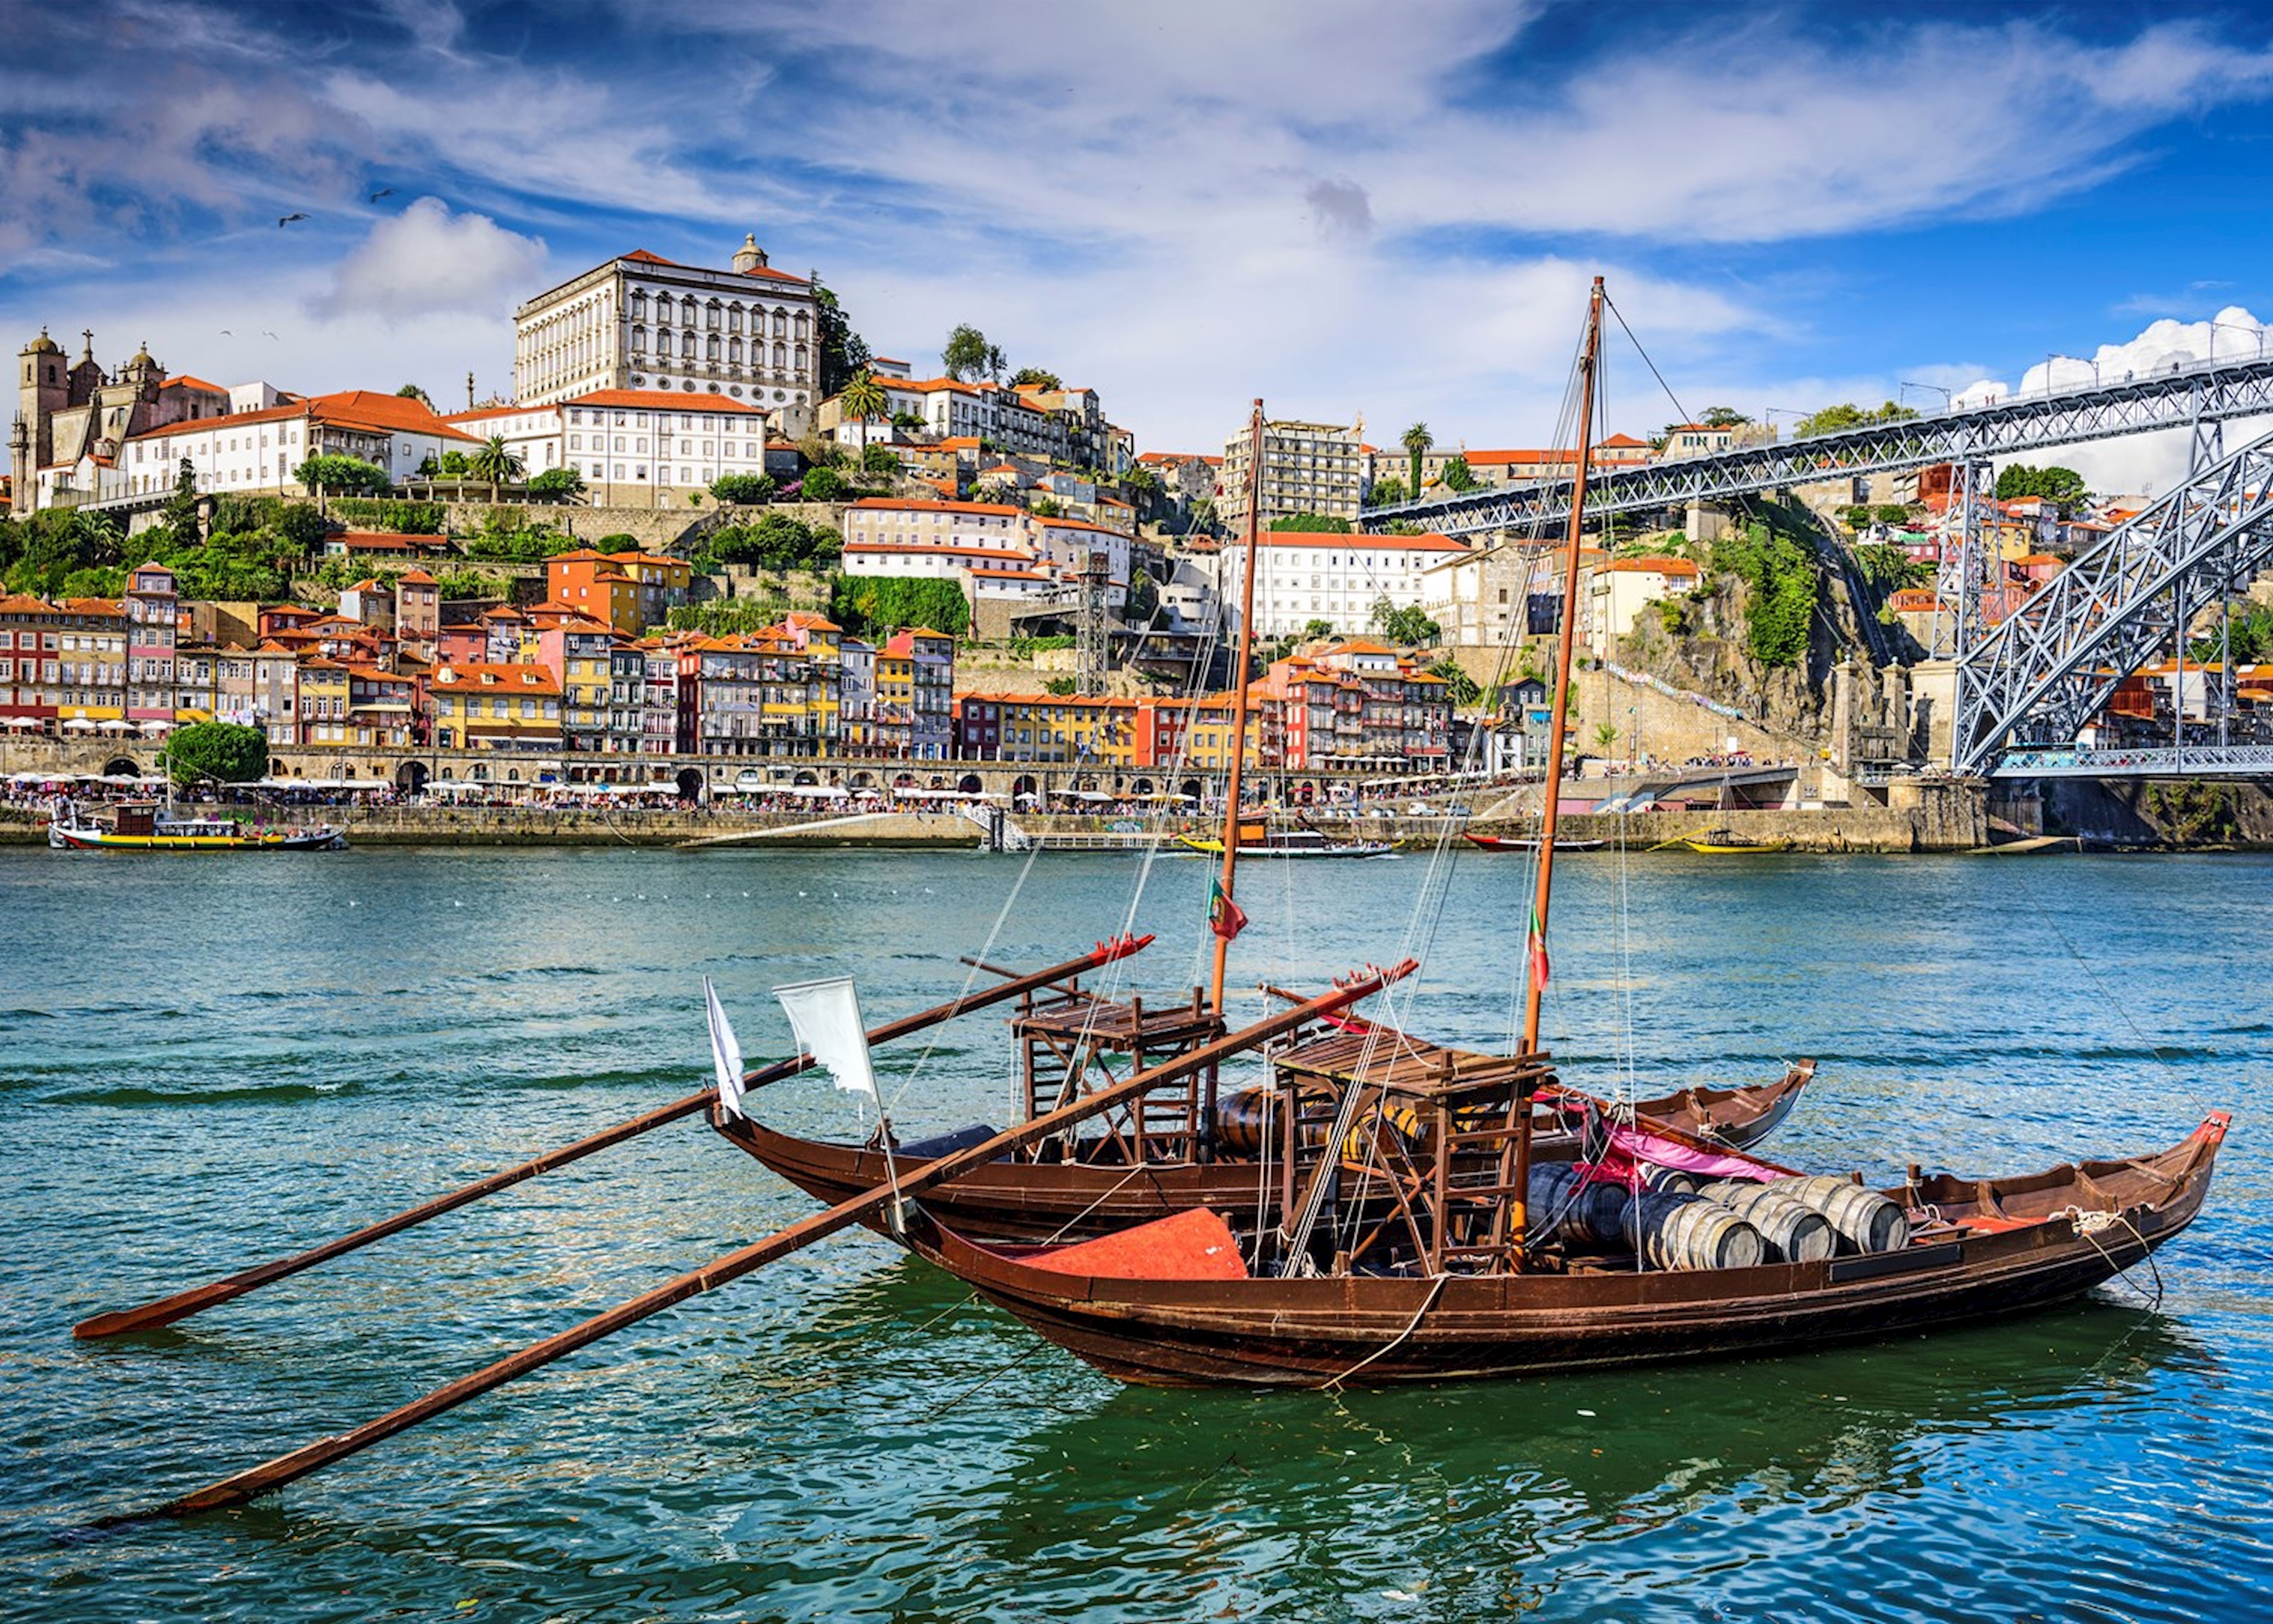 Douro river cruise: port tasting & palaces